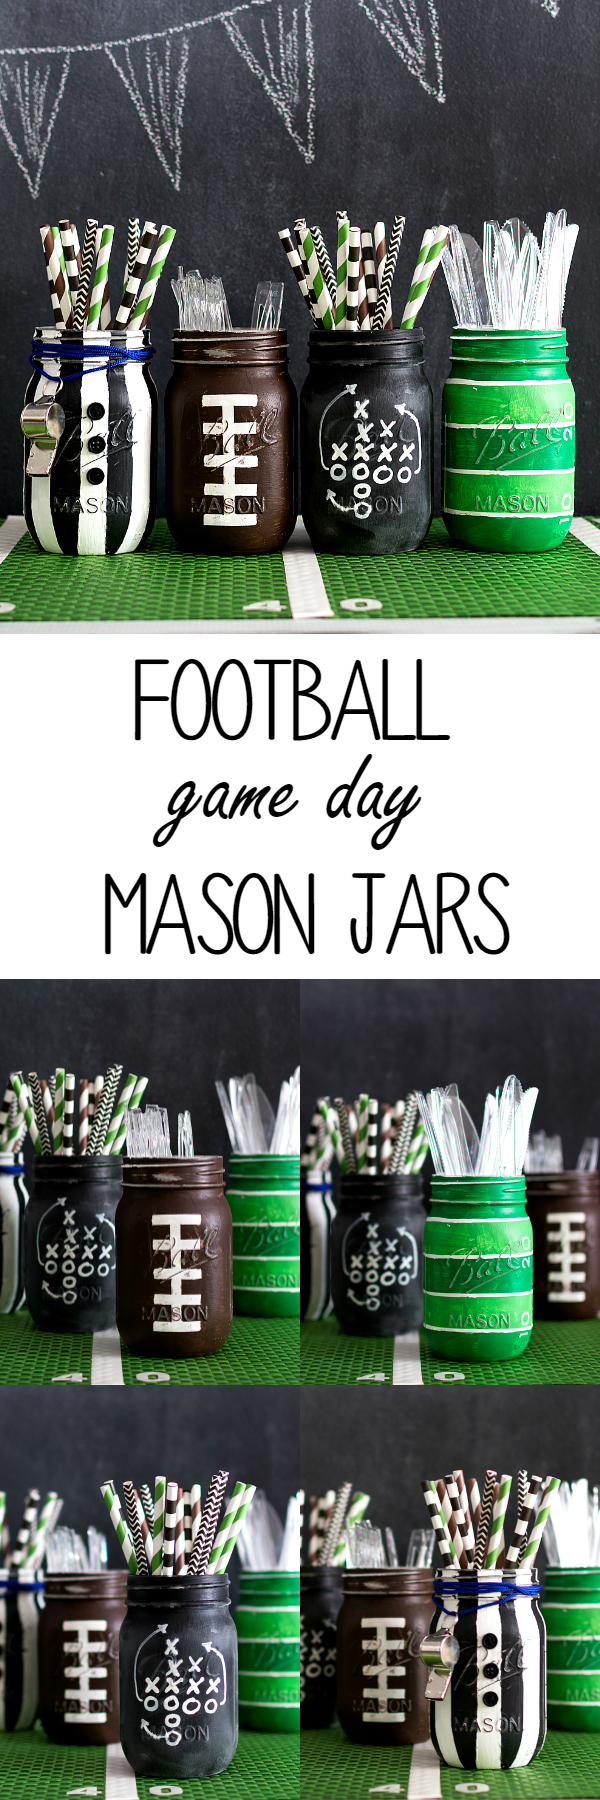 Mason Jar Craft Ideas for Football Game Day Party